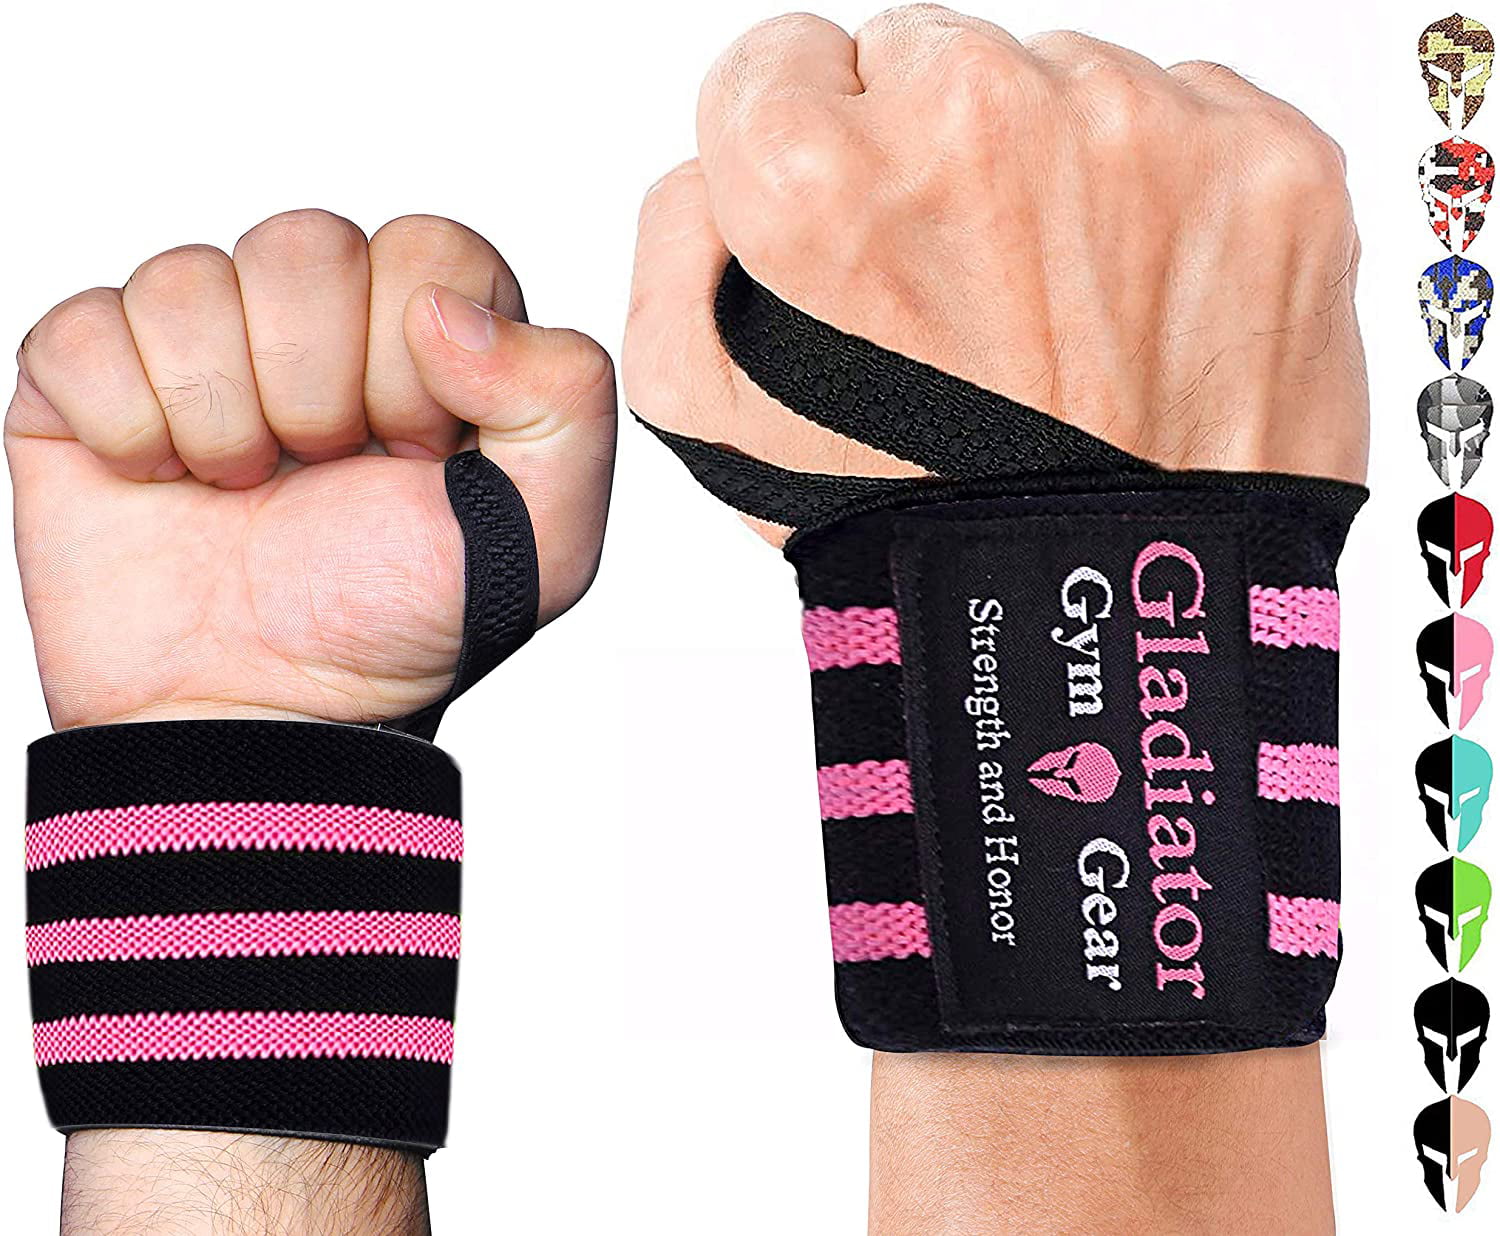 Details about   Wrist Support Straps For Weight Lifting Fitness Gym Sport Wristbands Accessories 